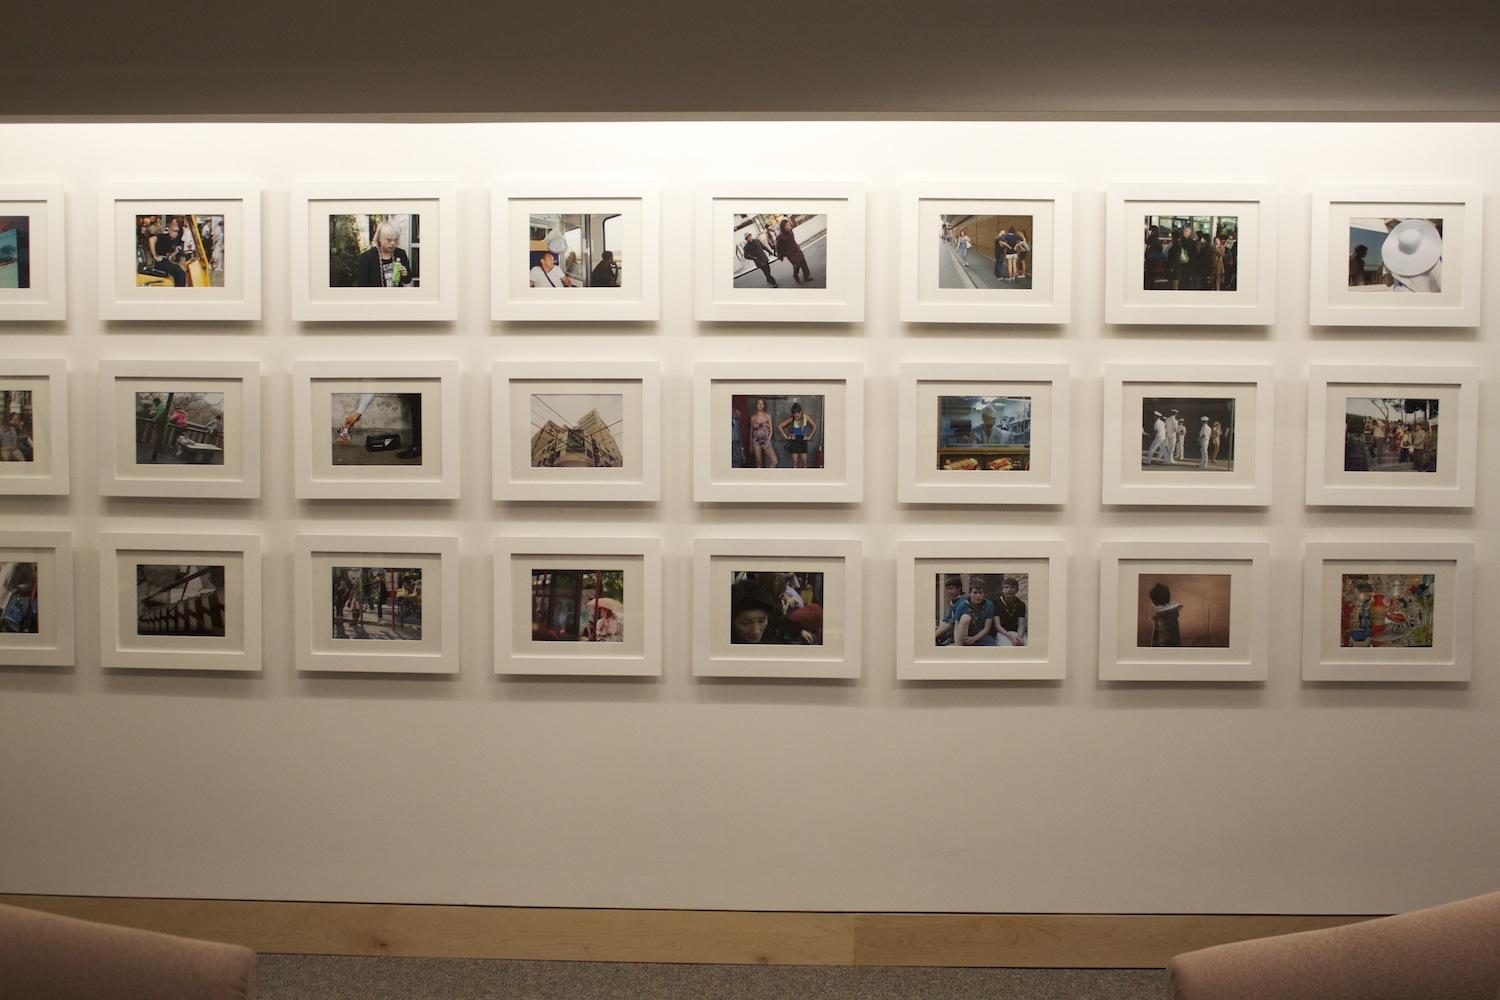 Hayden Hartnett’s Project Space is now open on the second floor of the Leon Lowenstein building in the Office of Undergraduate Admissions. The space features a past student’s photographs from a documentary photography course in Japan. (Sara Azoulay/The Observer)